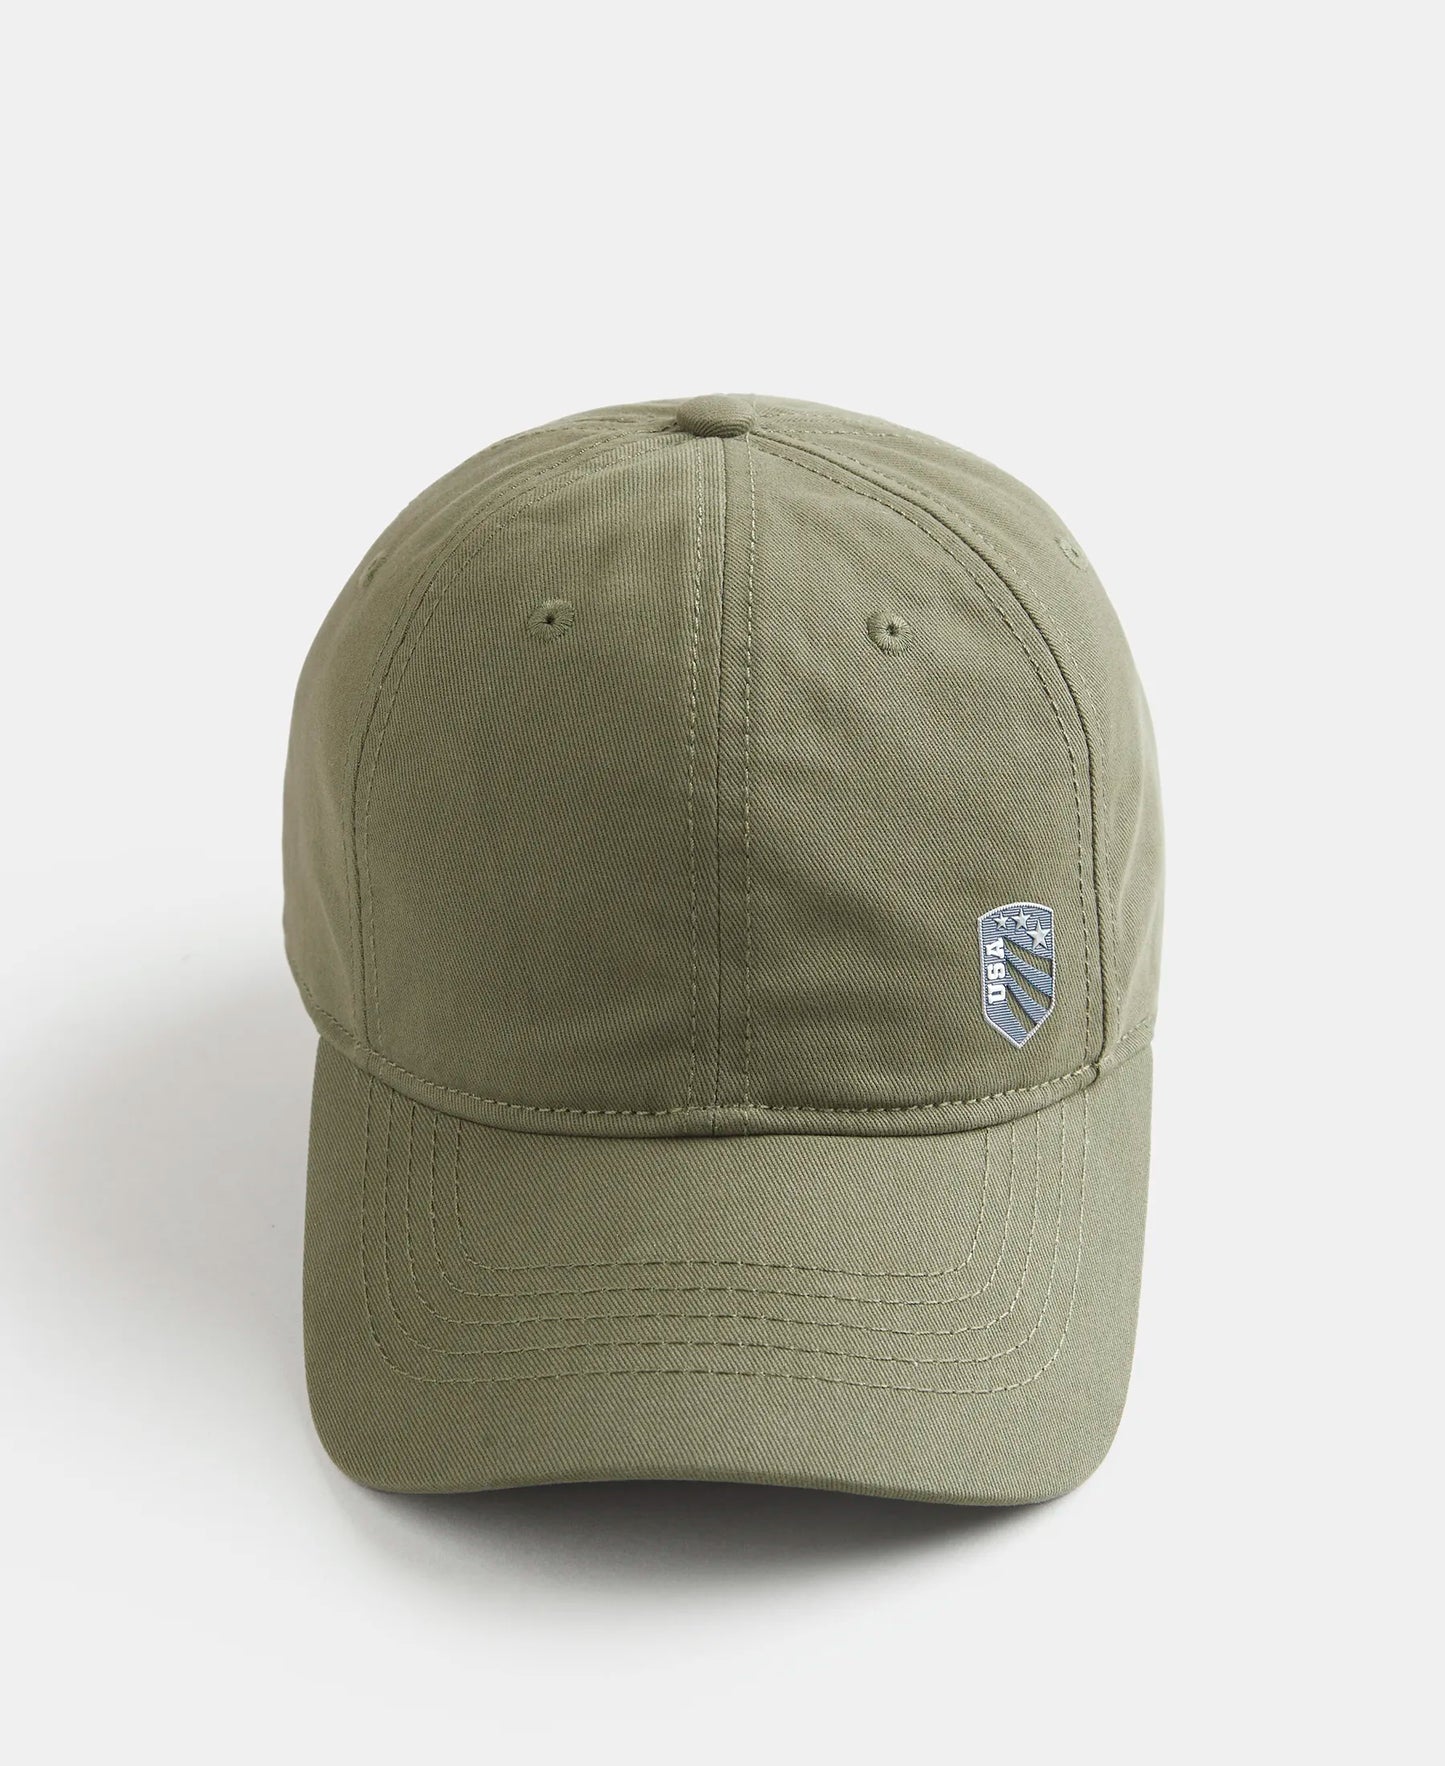 Super Combed Cotton Solid Cap with Adjustable Back Closure - Olive-1